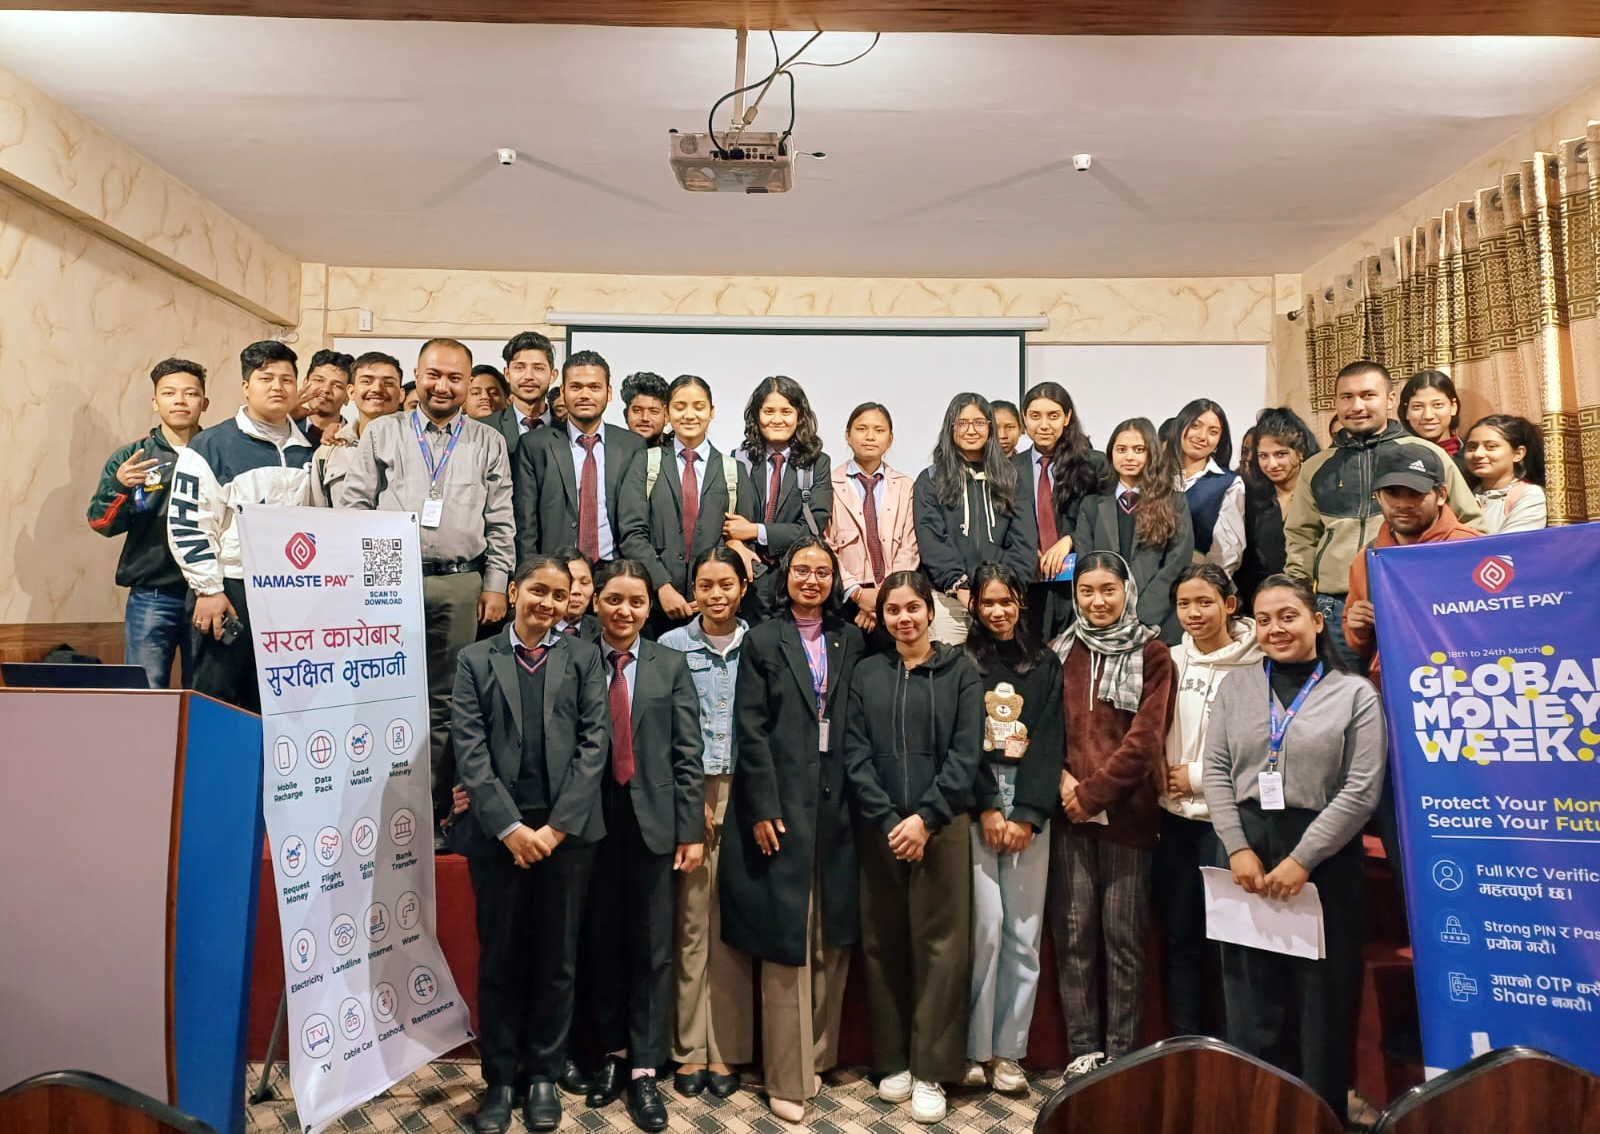 Namaste Pay successfully conducted different activities on Global Money Week 2024